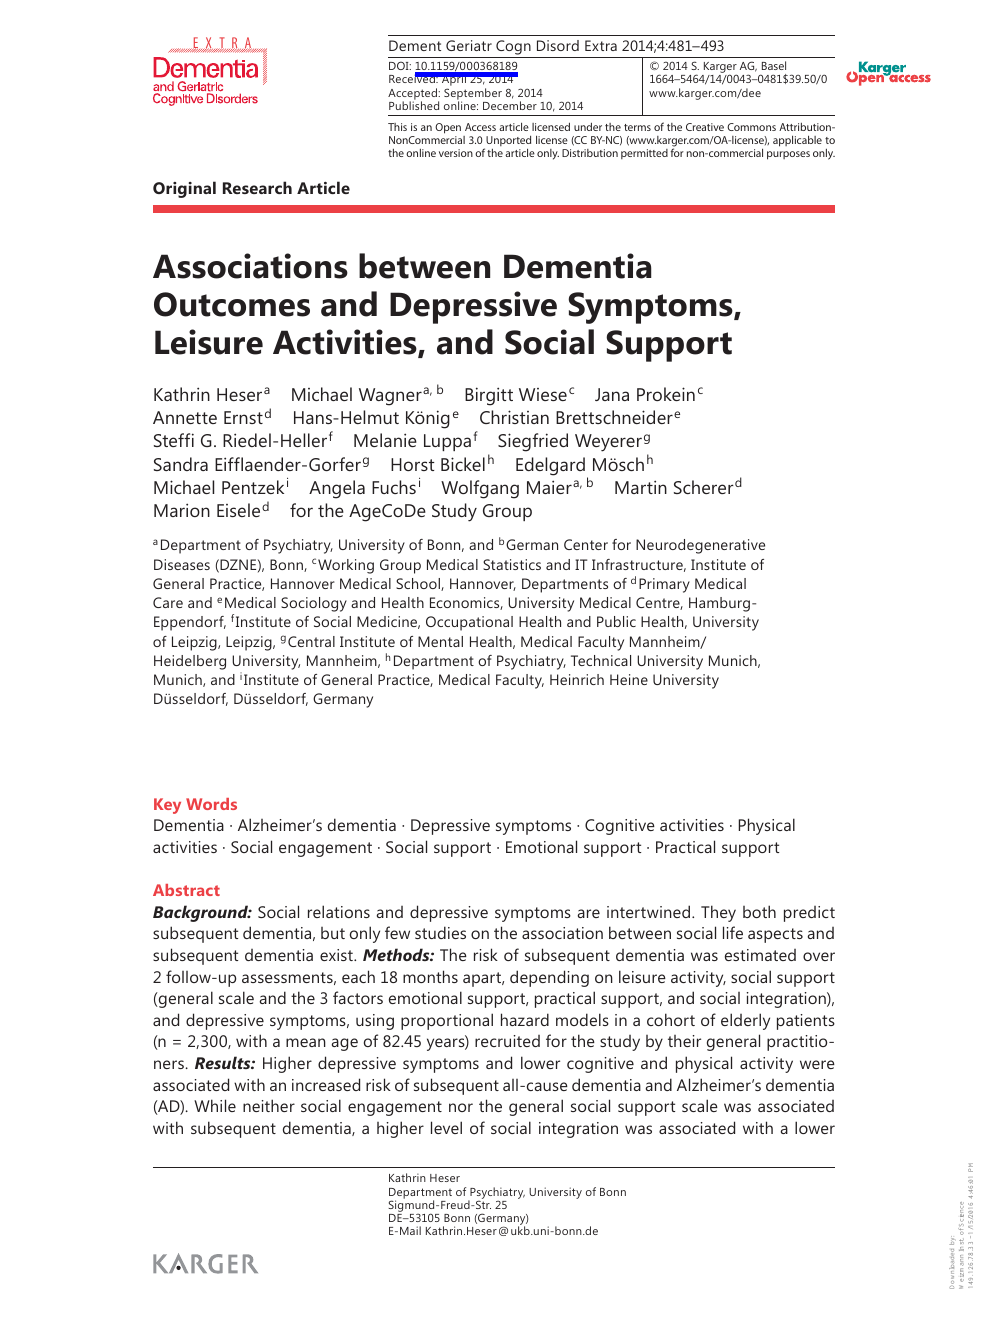 Associations Between Dementia Outcomes And Depressive Symptoms Leisure Activities And Social Support Topic Of Research Paper In Psychology Download Scholarly Article Pdf And Read For Free On Cyberleninka Open Science Hub